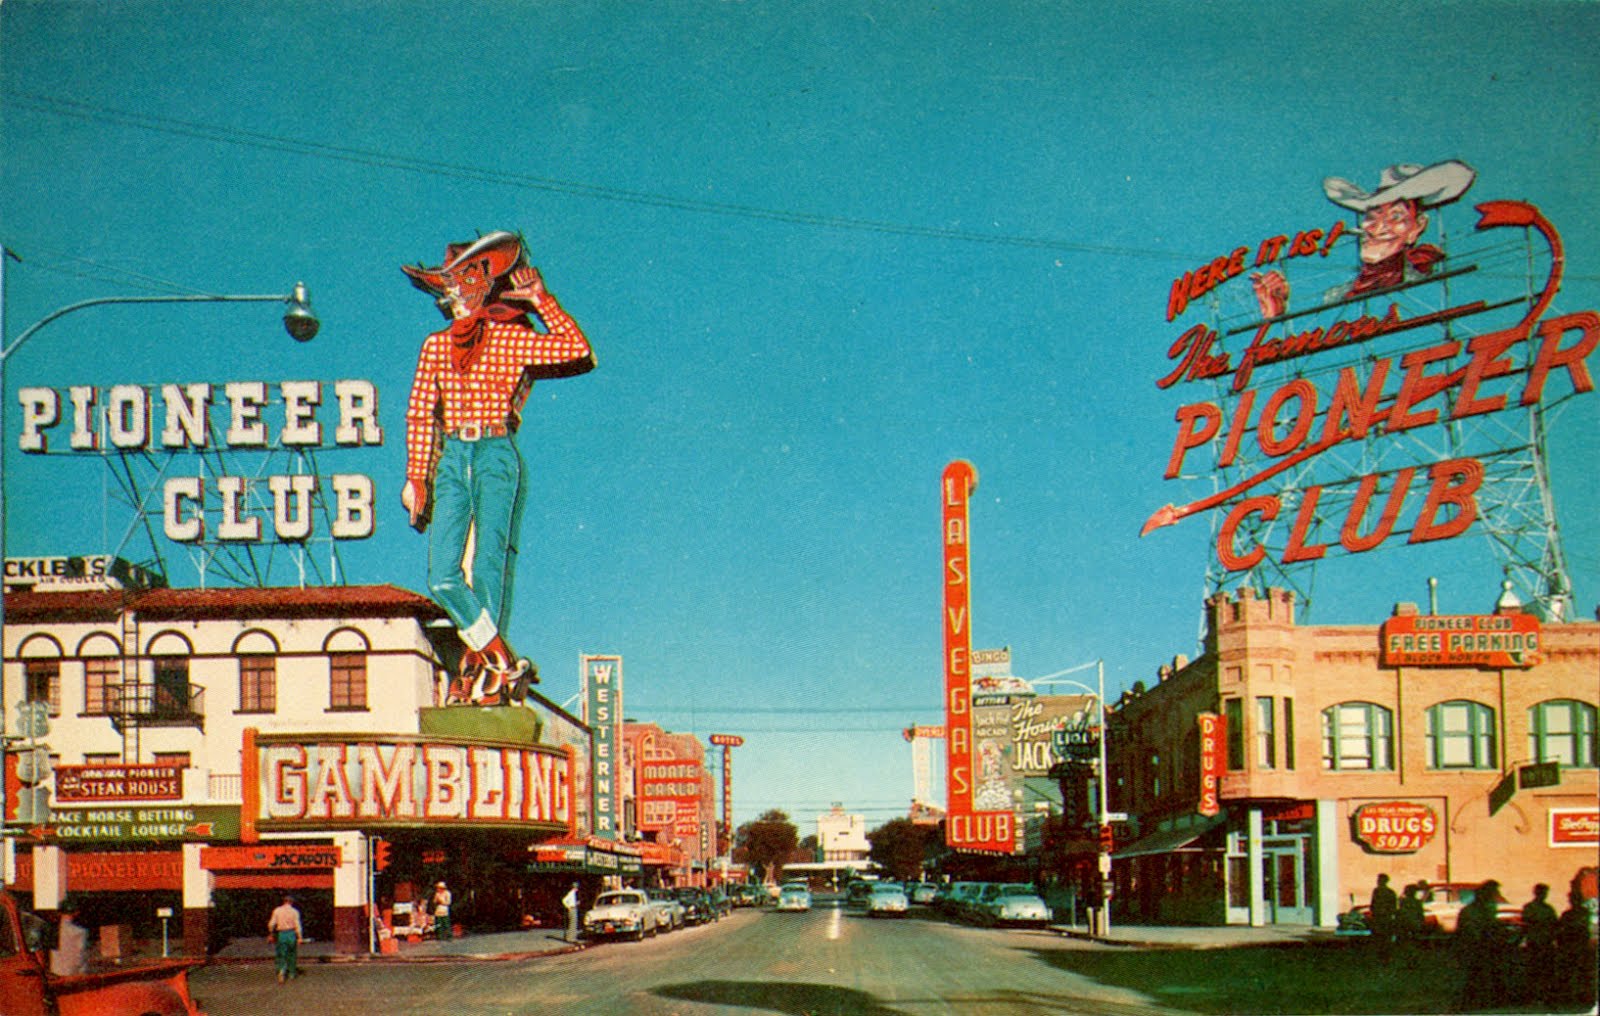 Vintage Photos of Las Vegas in the 1950s and 1960s ~ vintage everyday